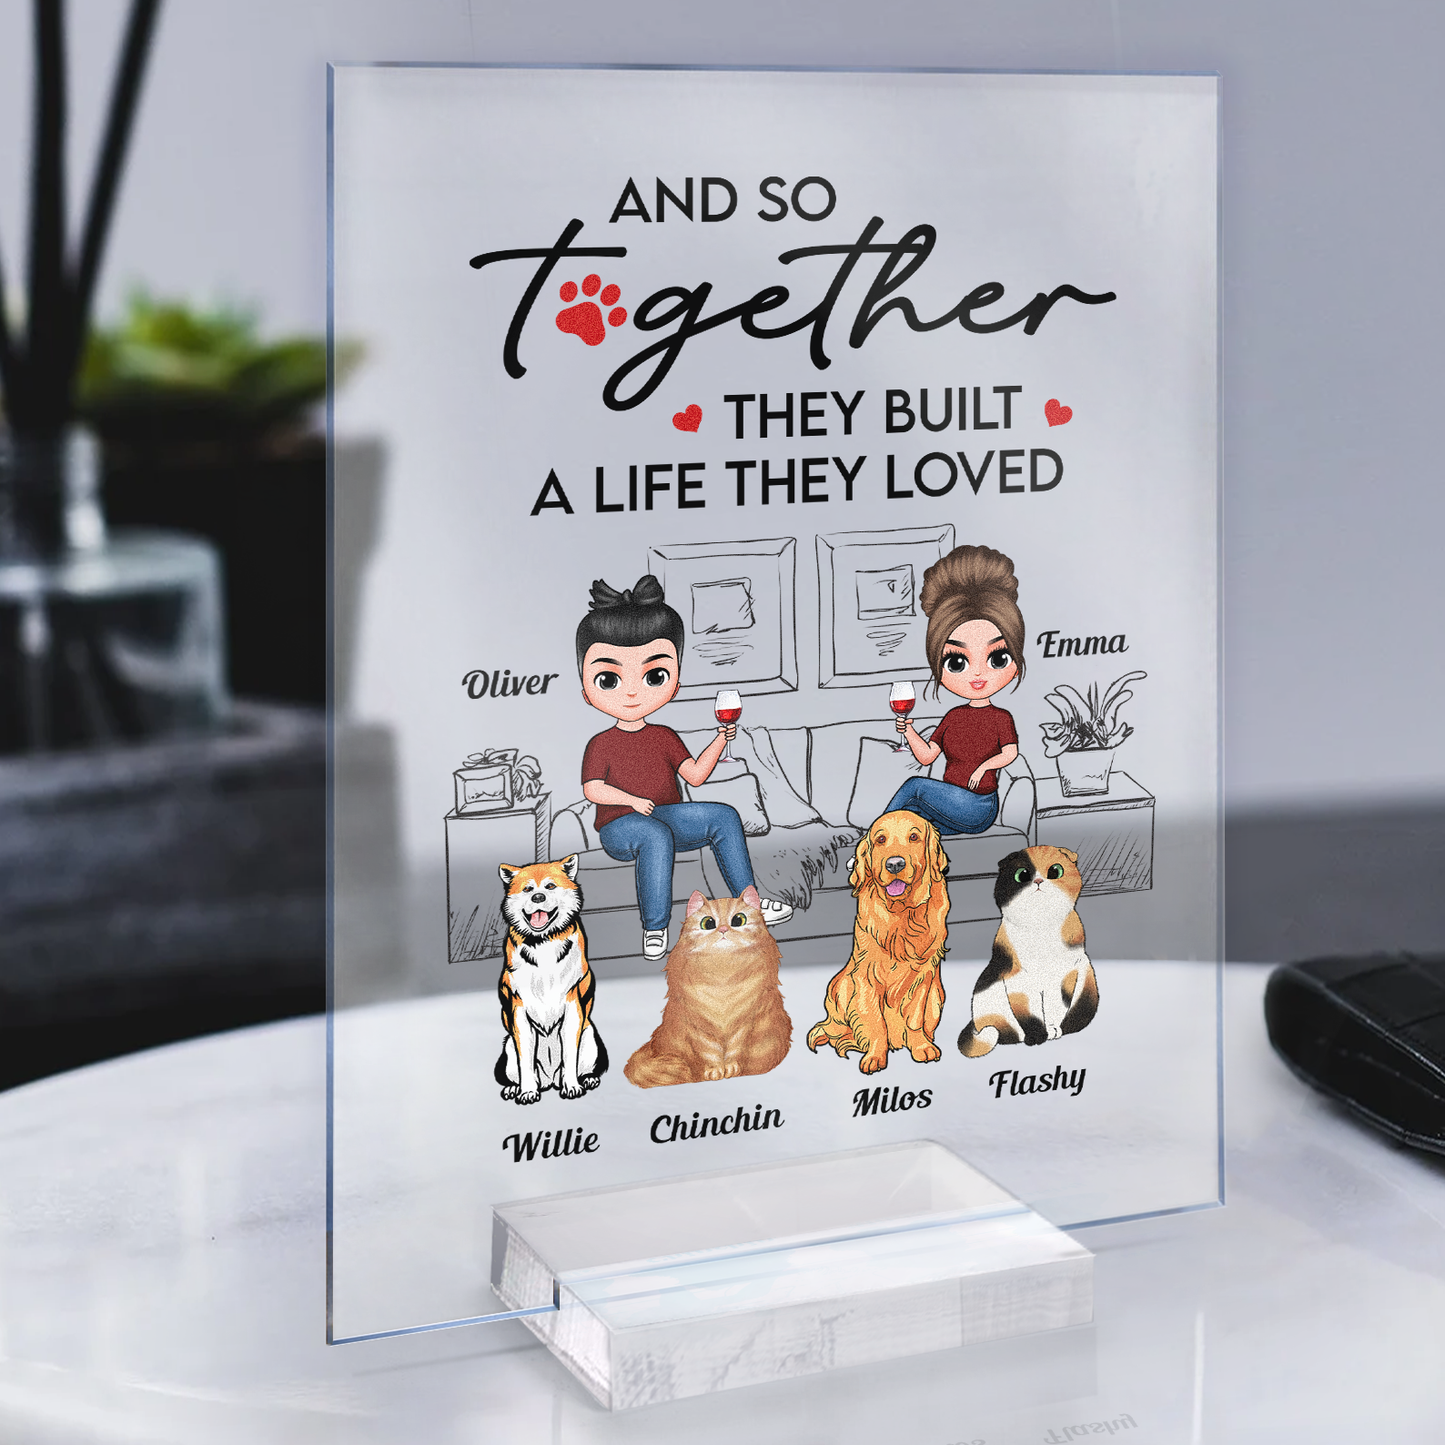 And So Together They Built A Life They Loved - Personalized Acrylic Plaque - Birthday, Anniversary, Home Decor Gift For Family, Dog & Cat Lovers